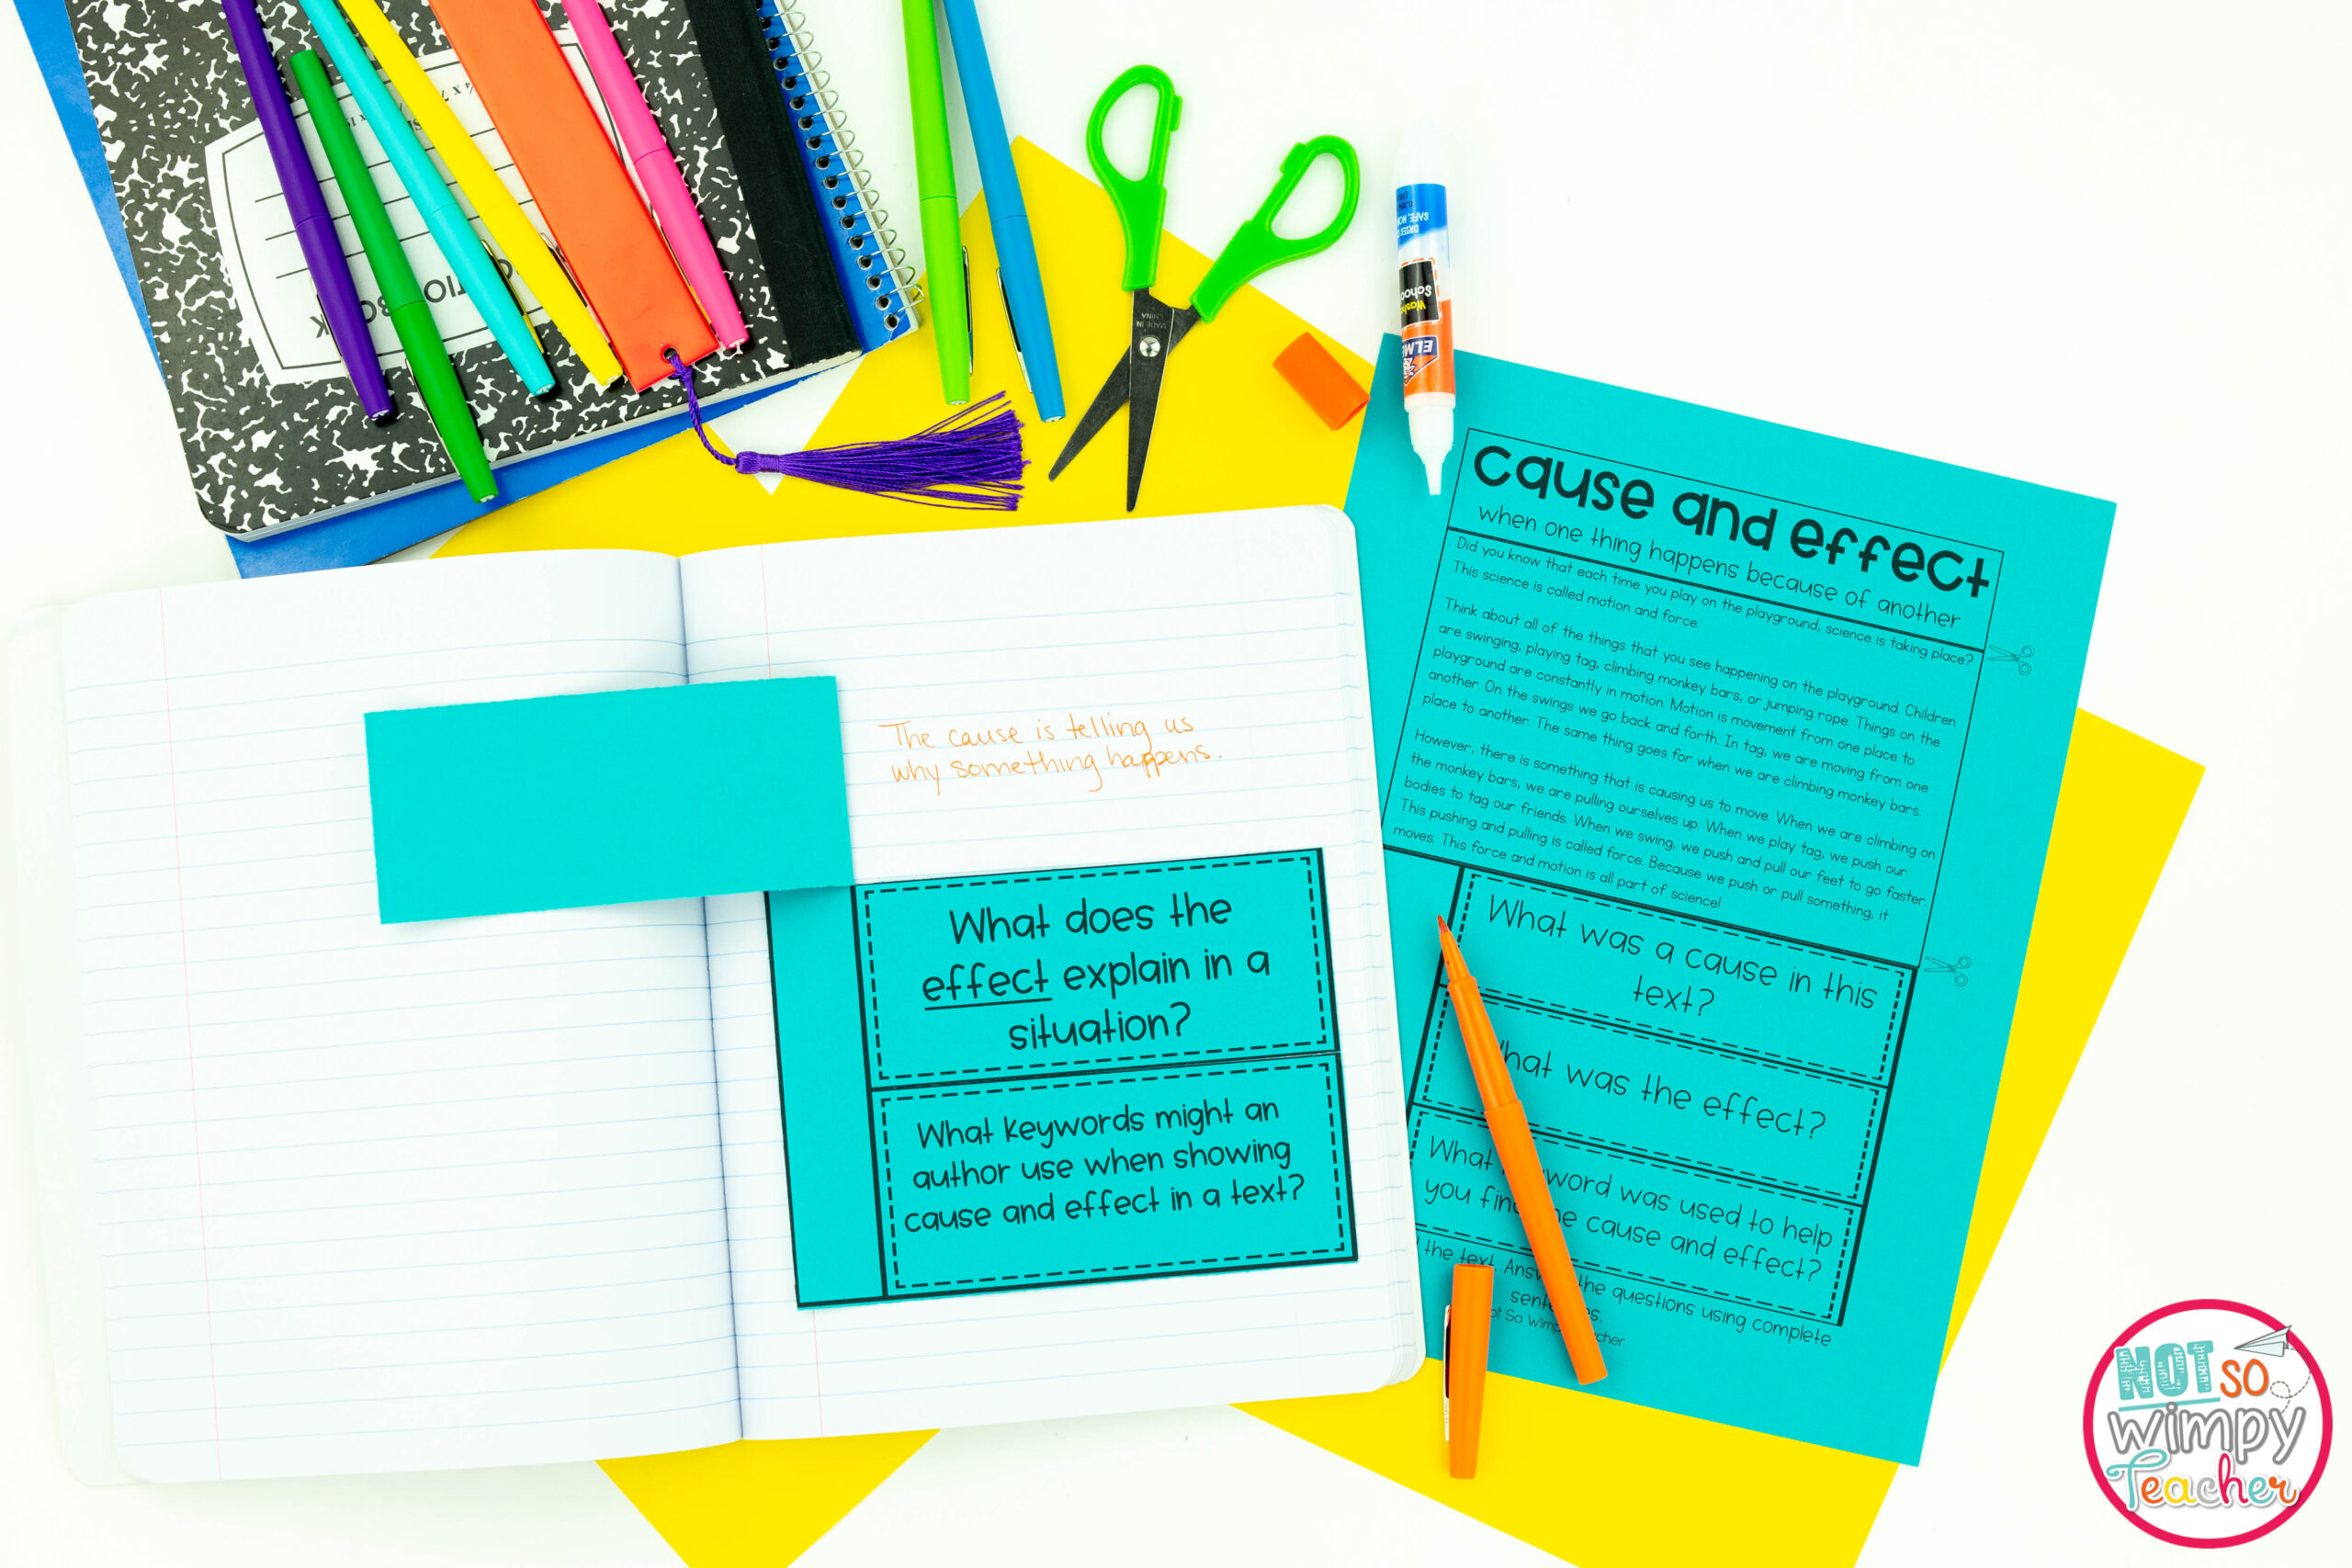 Image shows interactive notebook pieces uses to respond to texts.